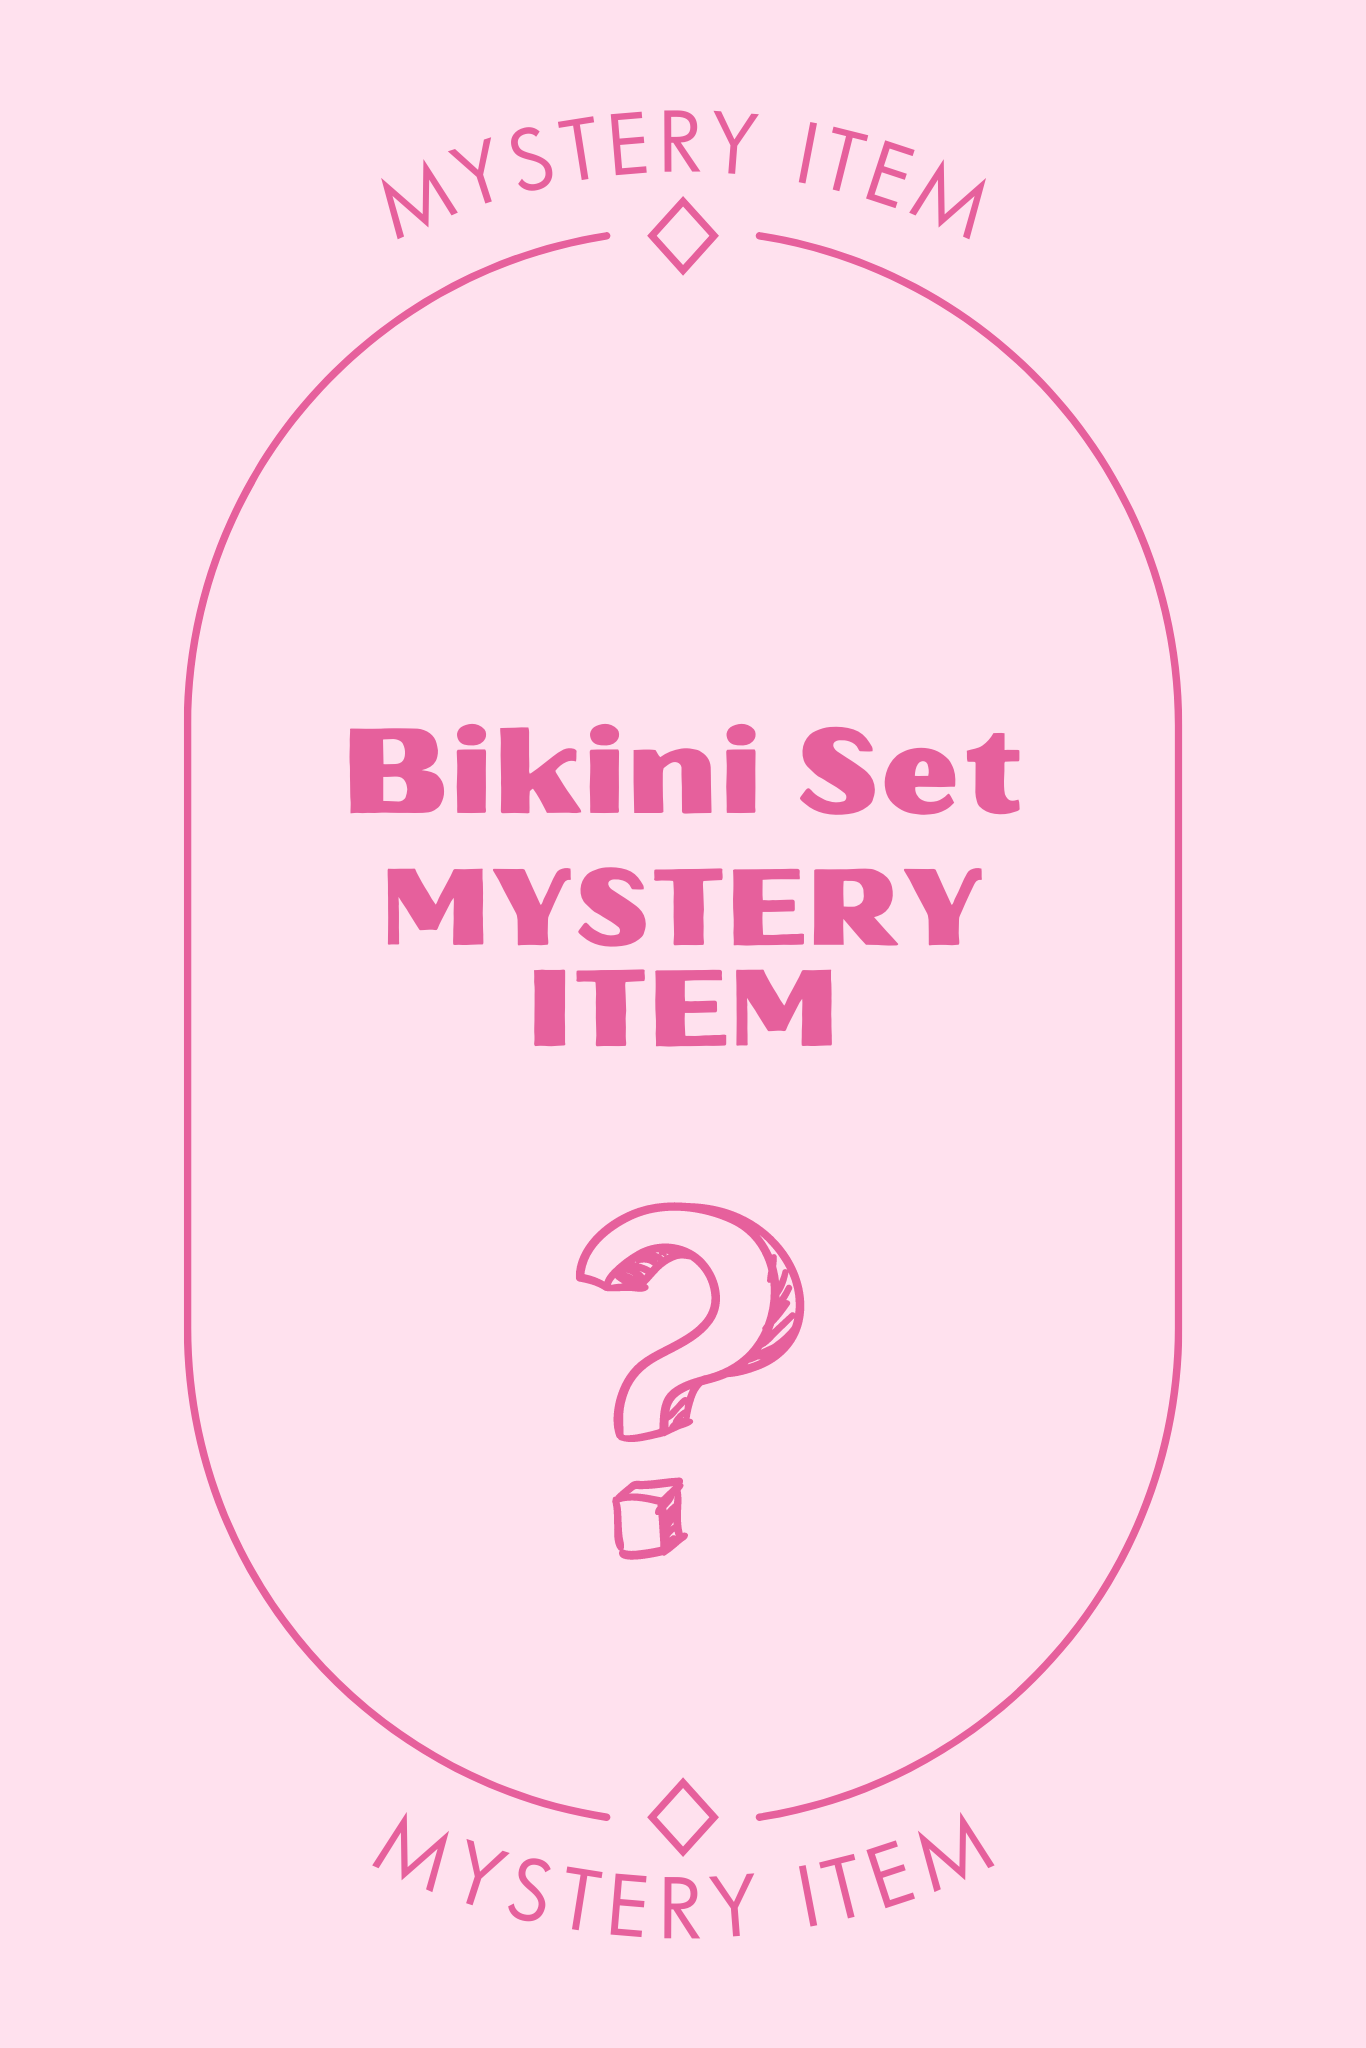 MYSTERYBOX_46_5a2cafcc-005a-4c3b-a245-82432b0c9e29.png